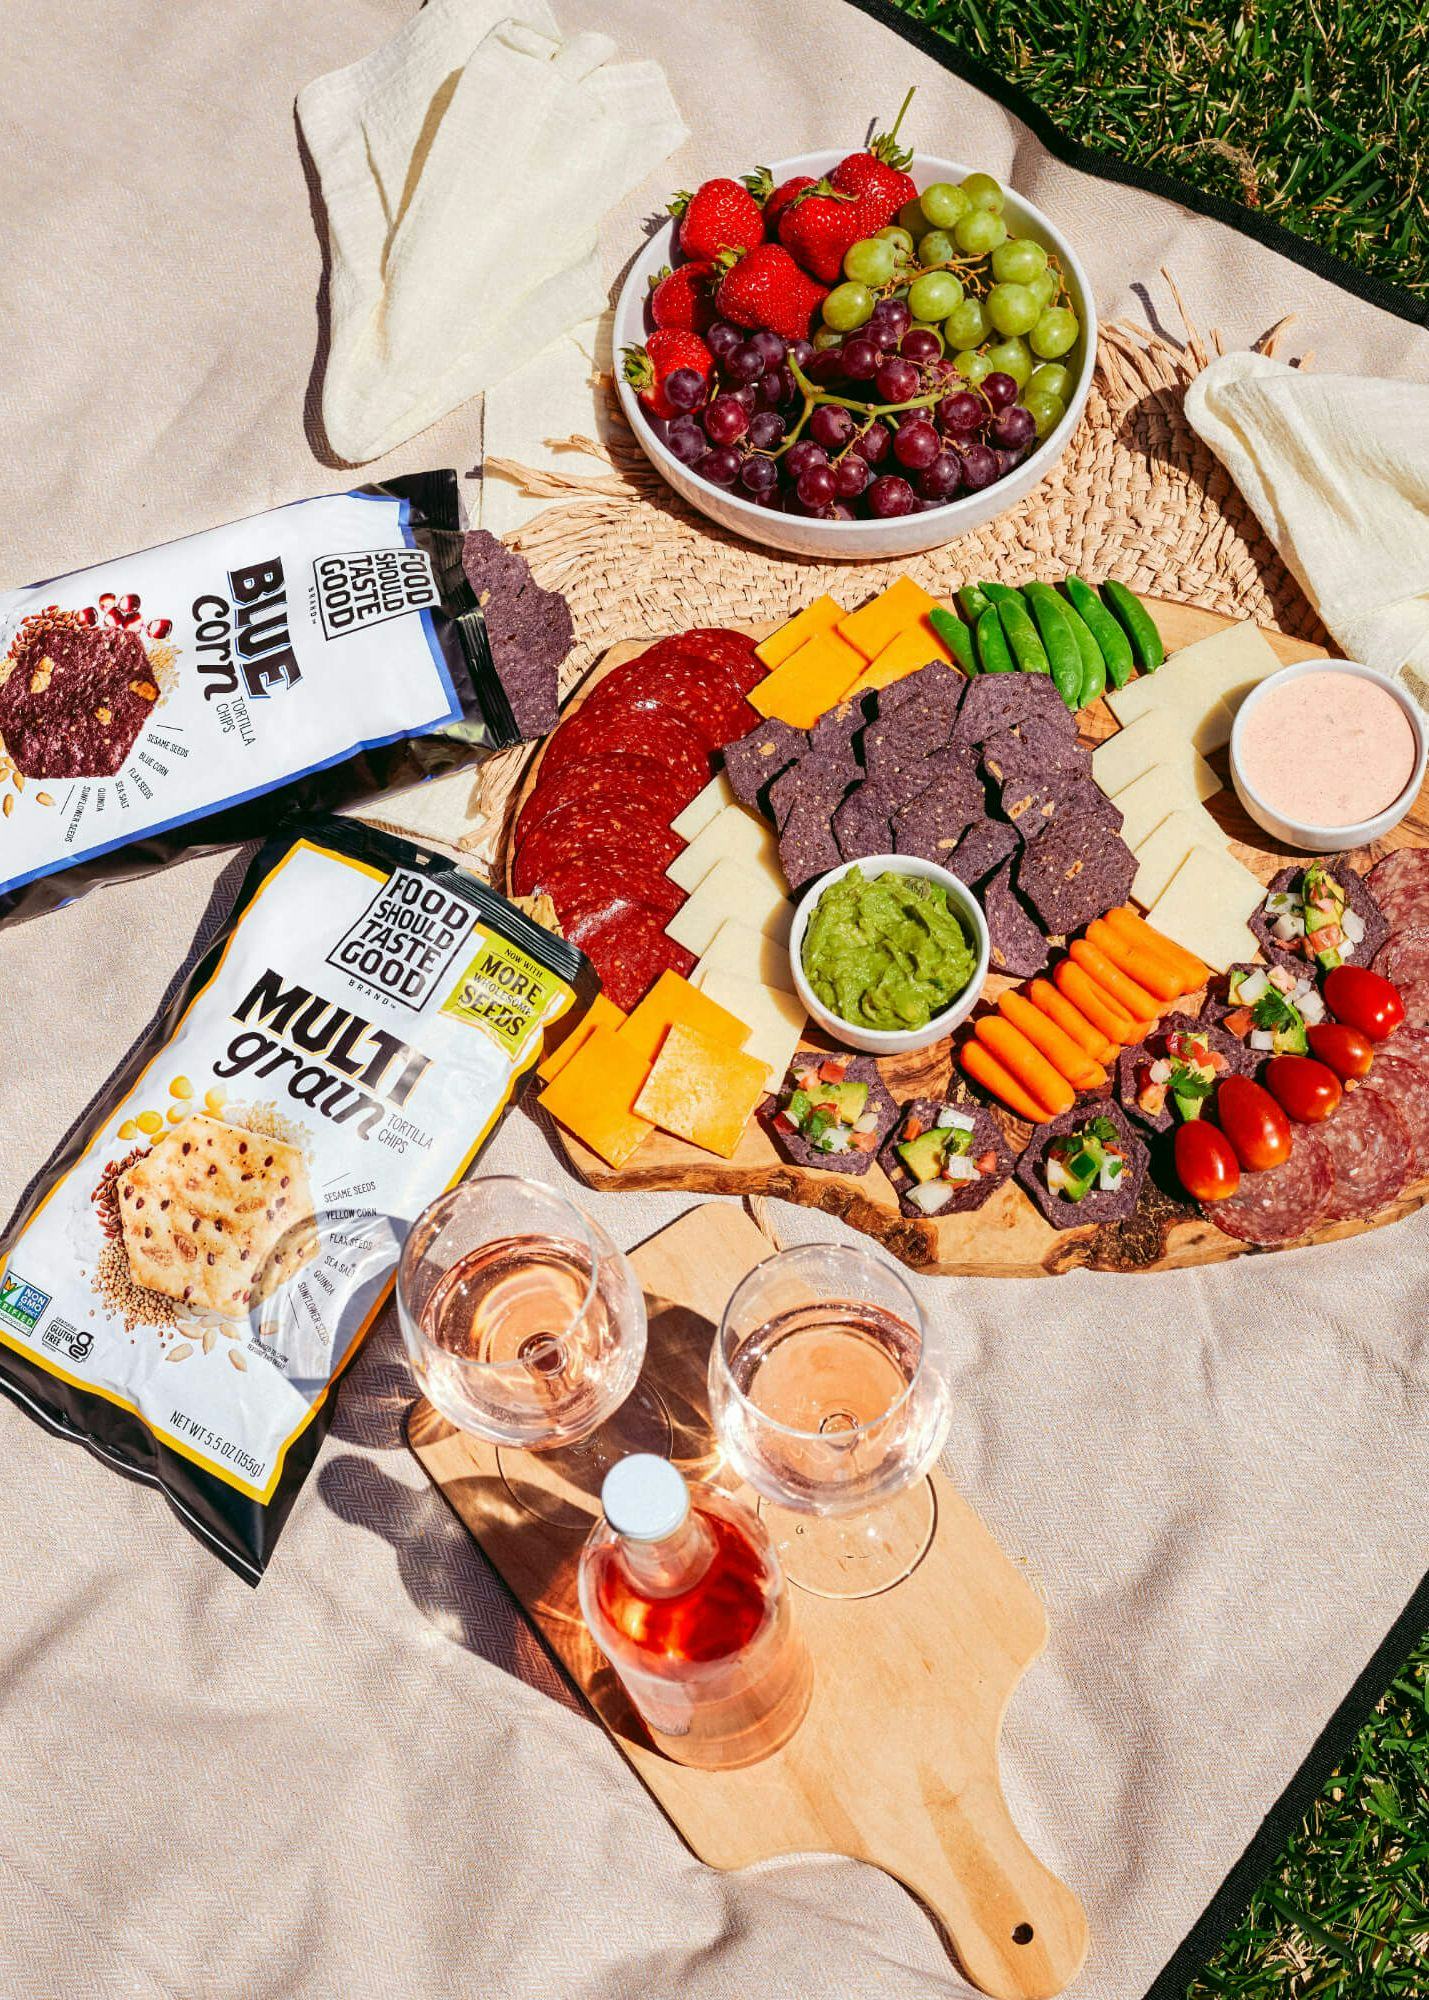 Picnic blanket with chips, charcuterie board, and drinks.